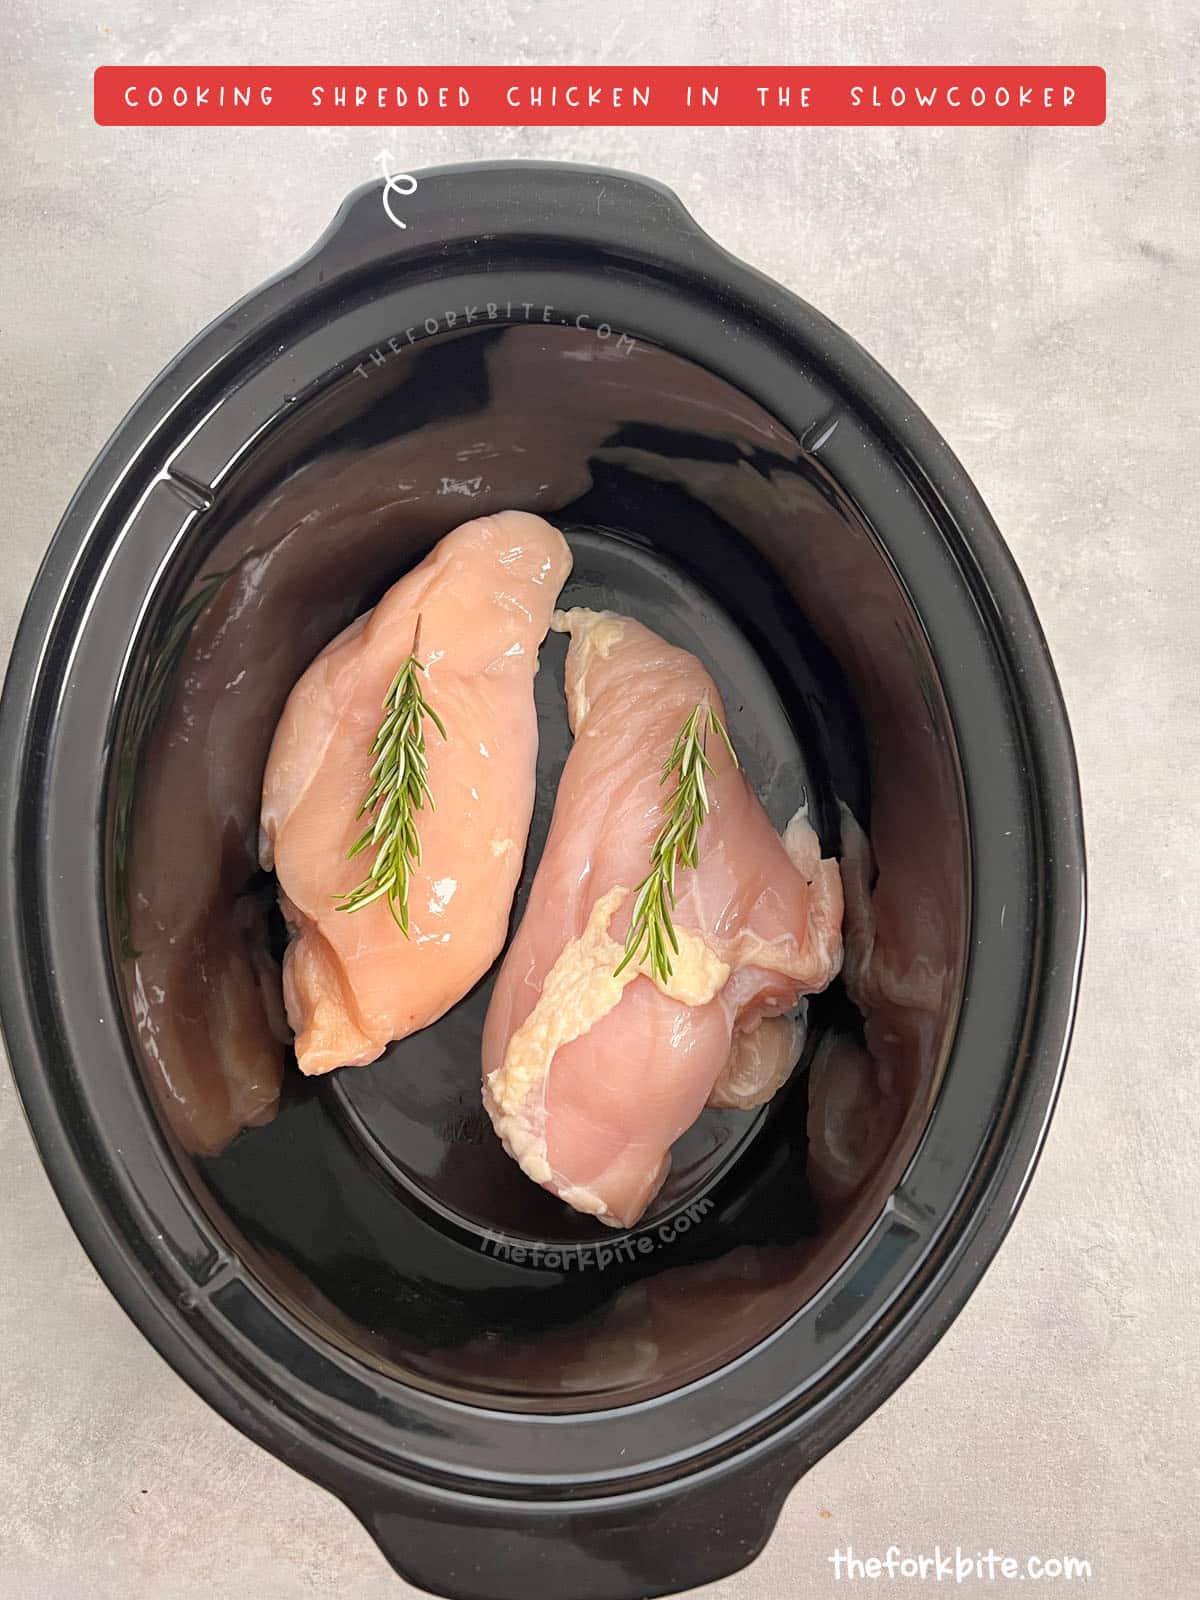 Arrange chicken into a single layer in the bottom of your slow cooker allowing the chicken to cook evenly on all sides. Avoid overlapping the chicken pieces because this will result in uneven cooking.